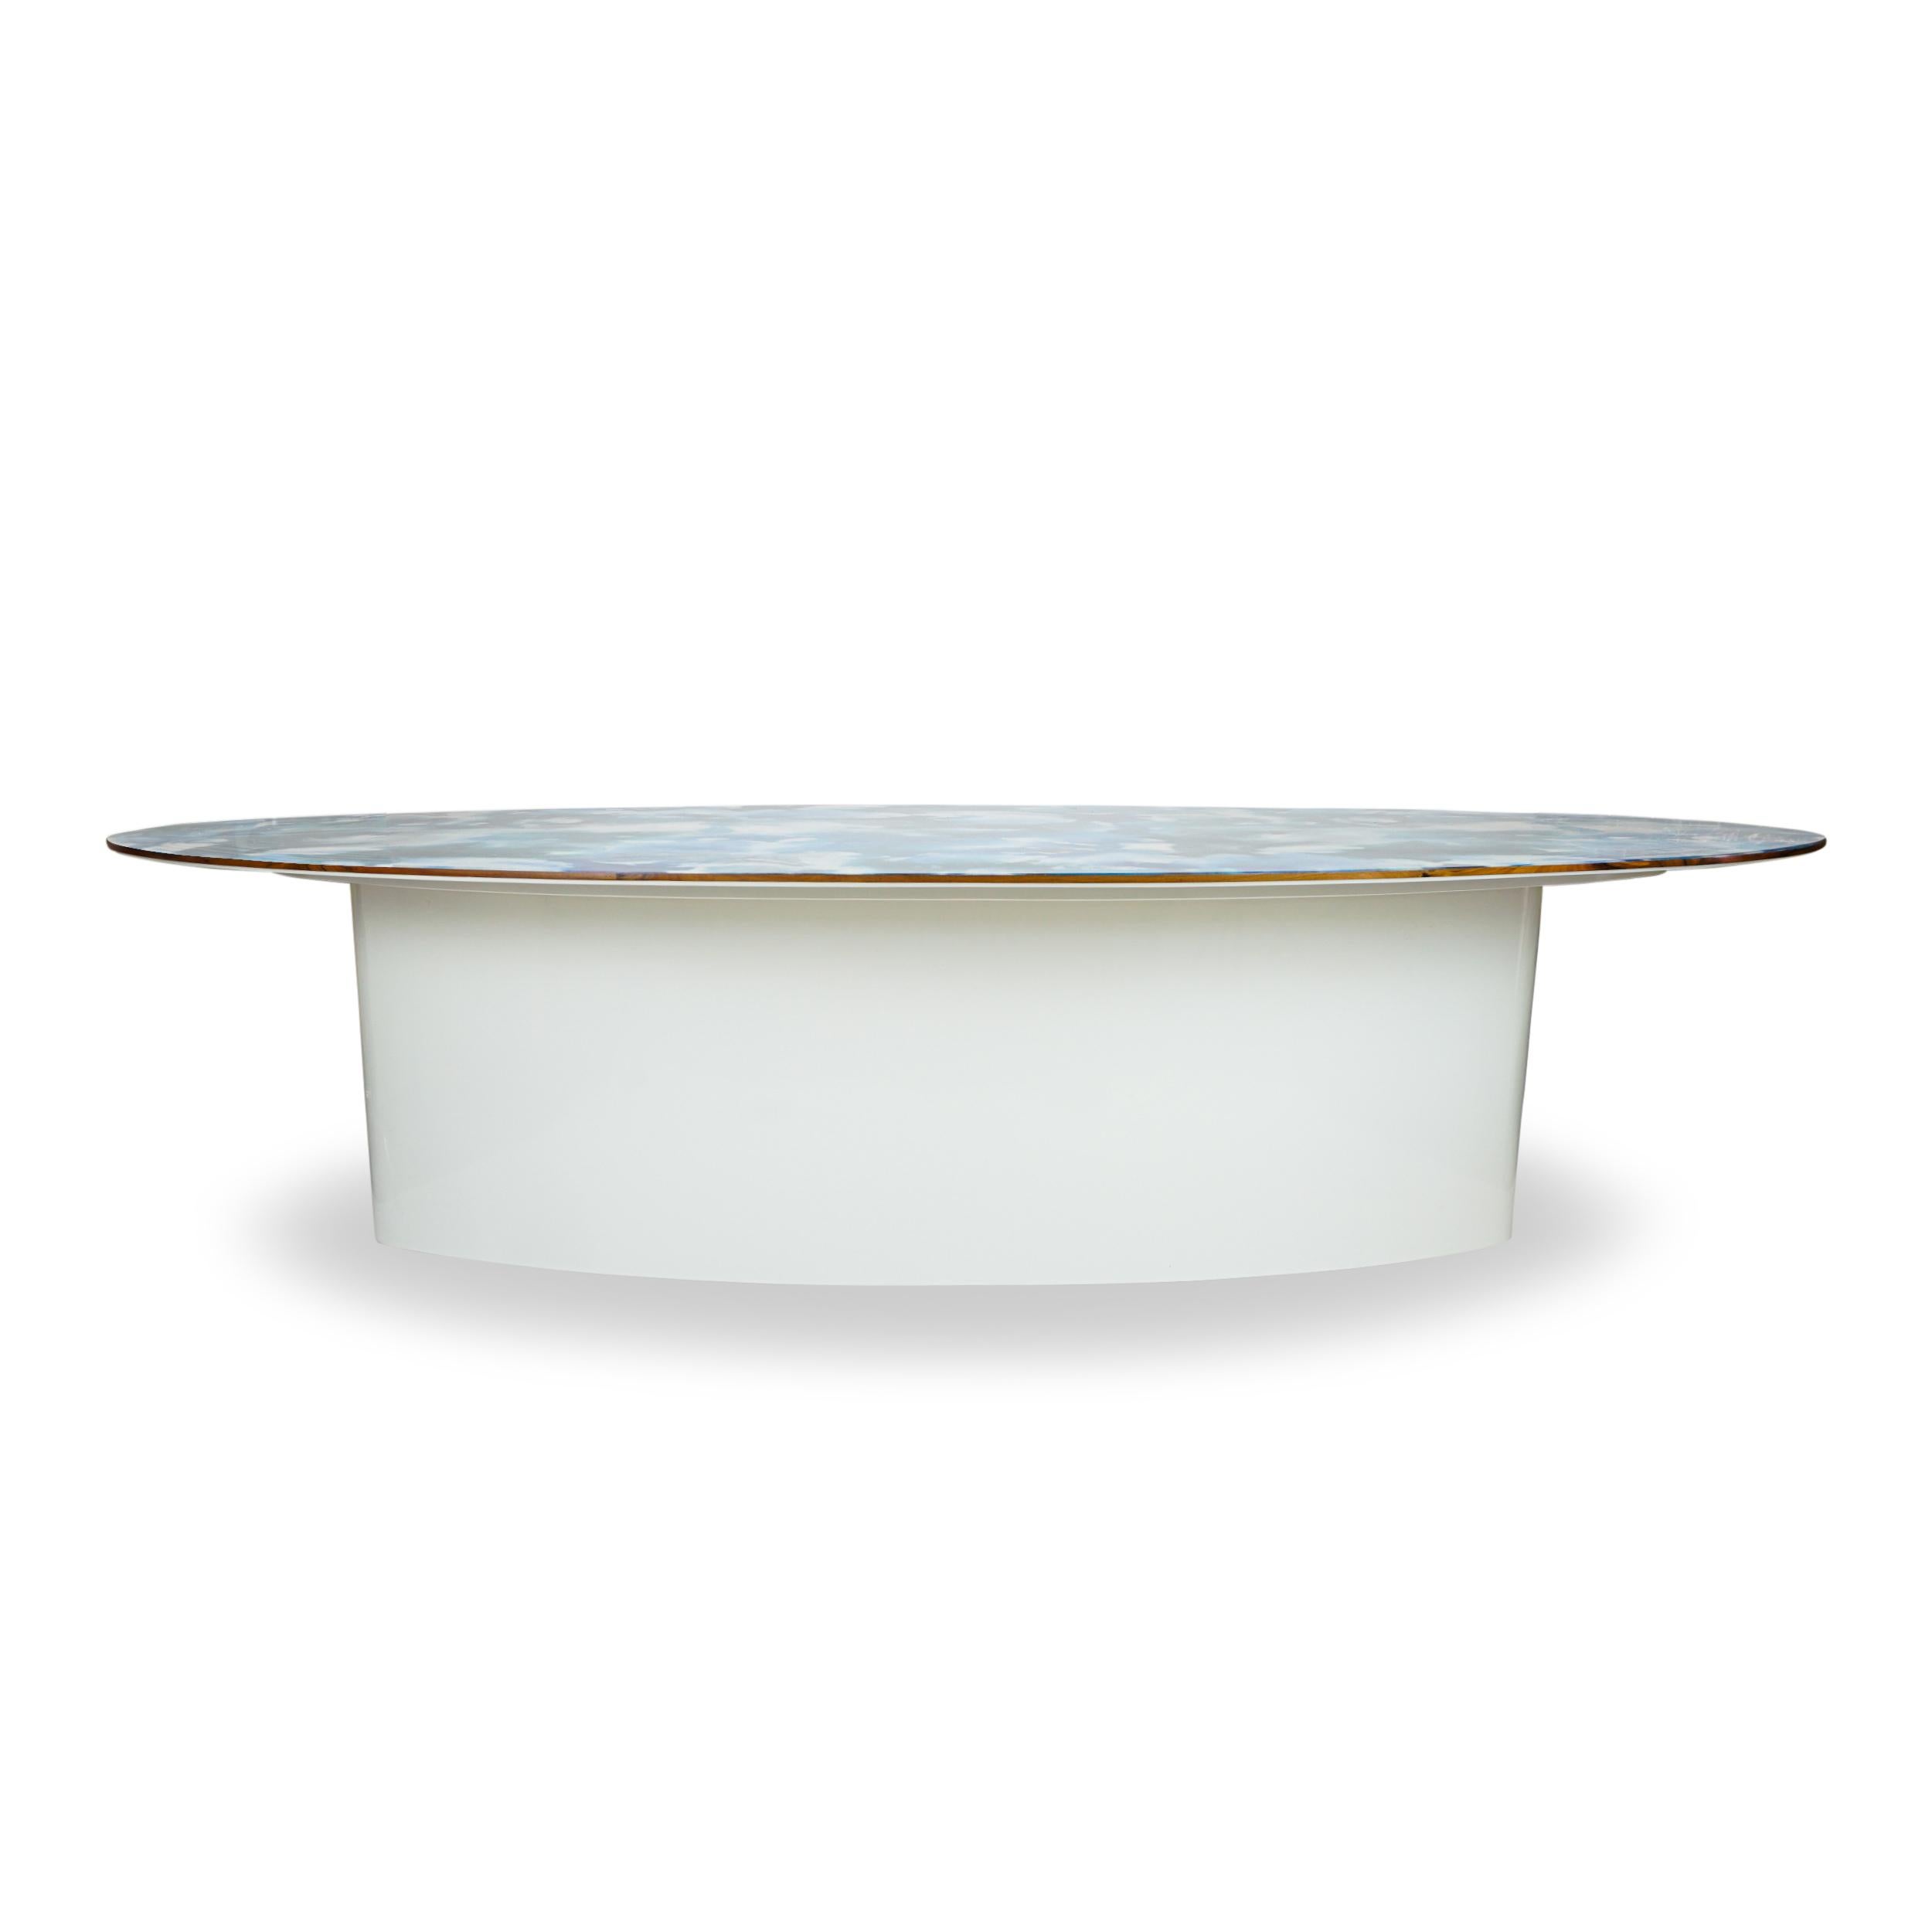 Ellipse Dining Table with Decorative Top Finished in Resin and Lacquered Base In New Condition For Sale In Greenwich, CT